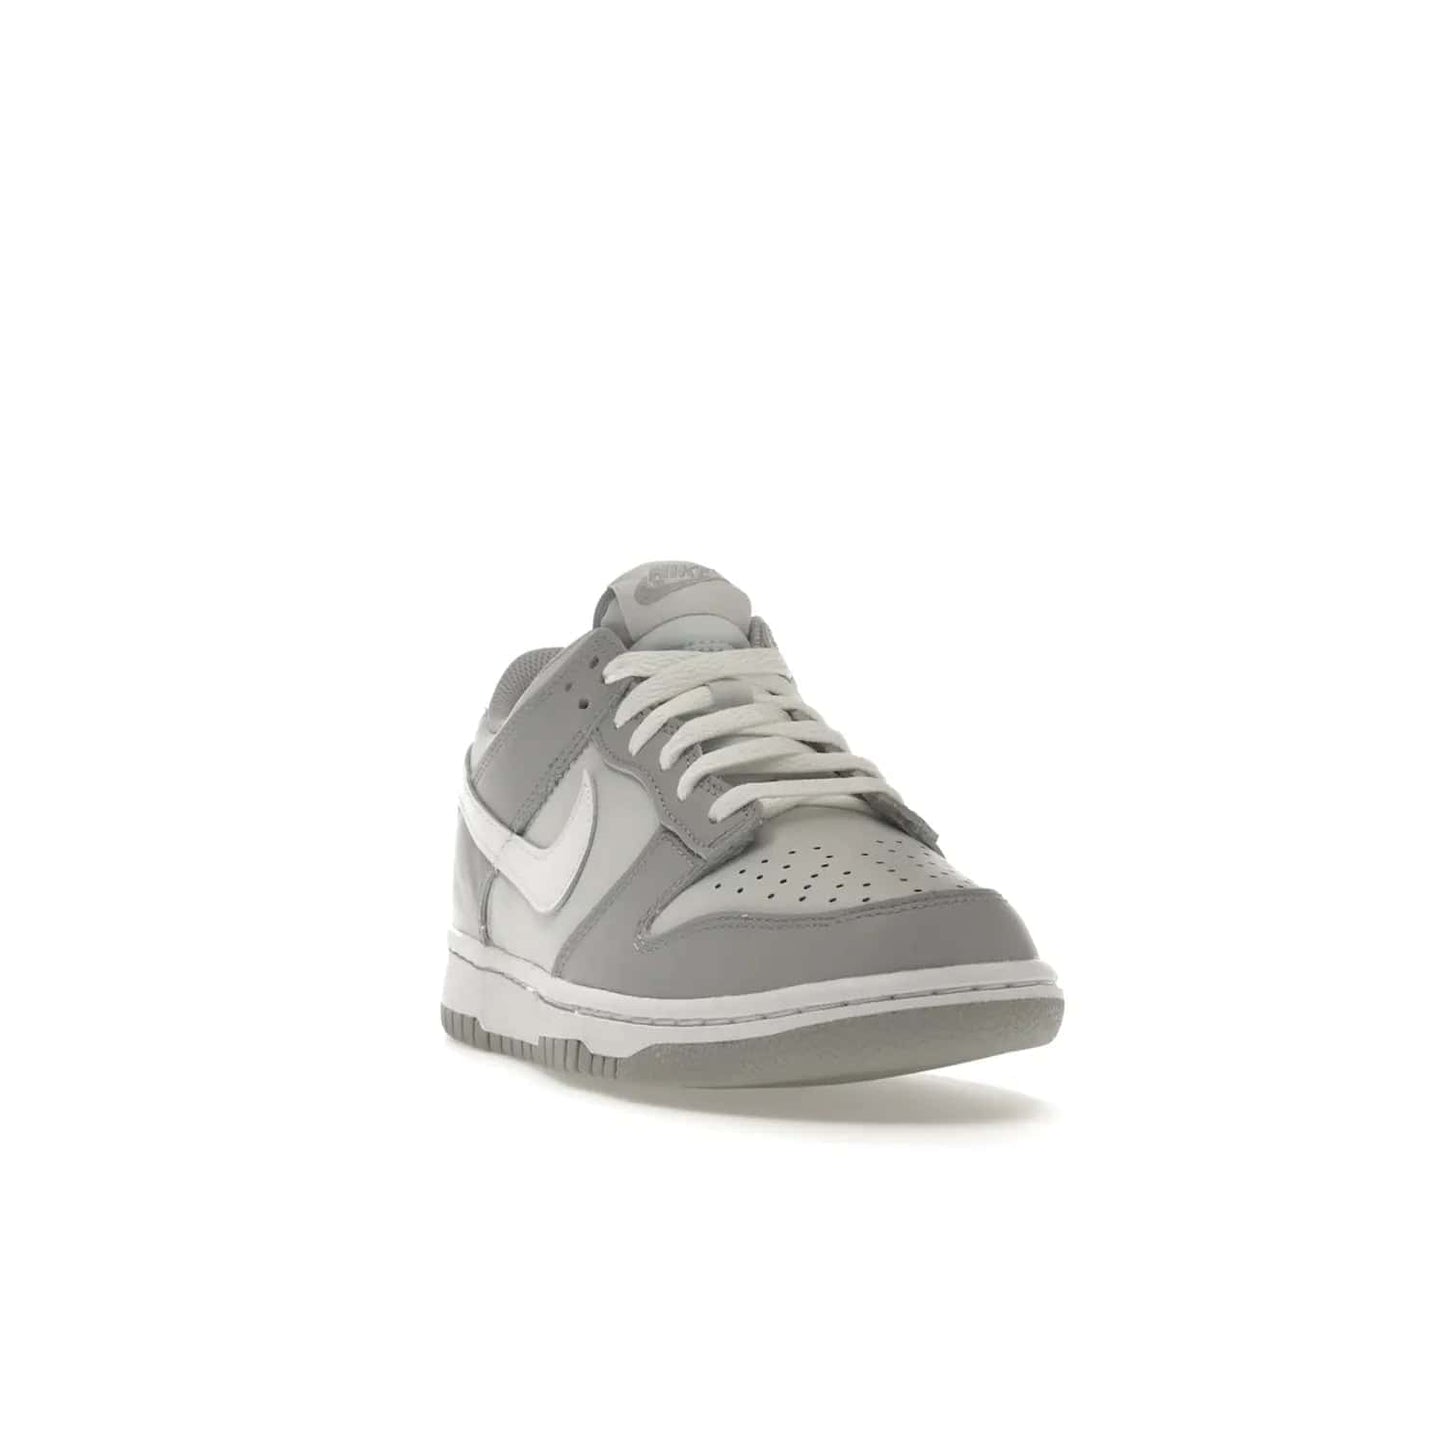 Nike Dunk Low Two-Toned Grey (GS) - Image 8 - Only at www.BallersClubKickz.com - Stylish Nike Dunk Low GS Two-Toned Grey featuring leather build, light/dark grey shades, white Swoosh logo & gray rubber outsole. Get ready to make a statement with this timeless classic released in March 2022.